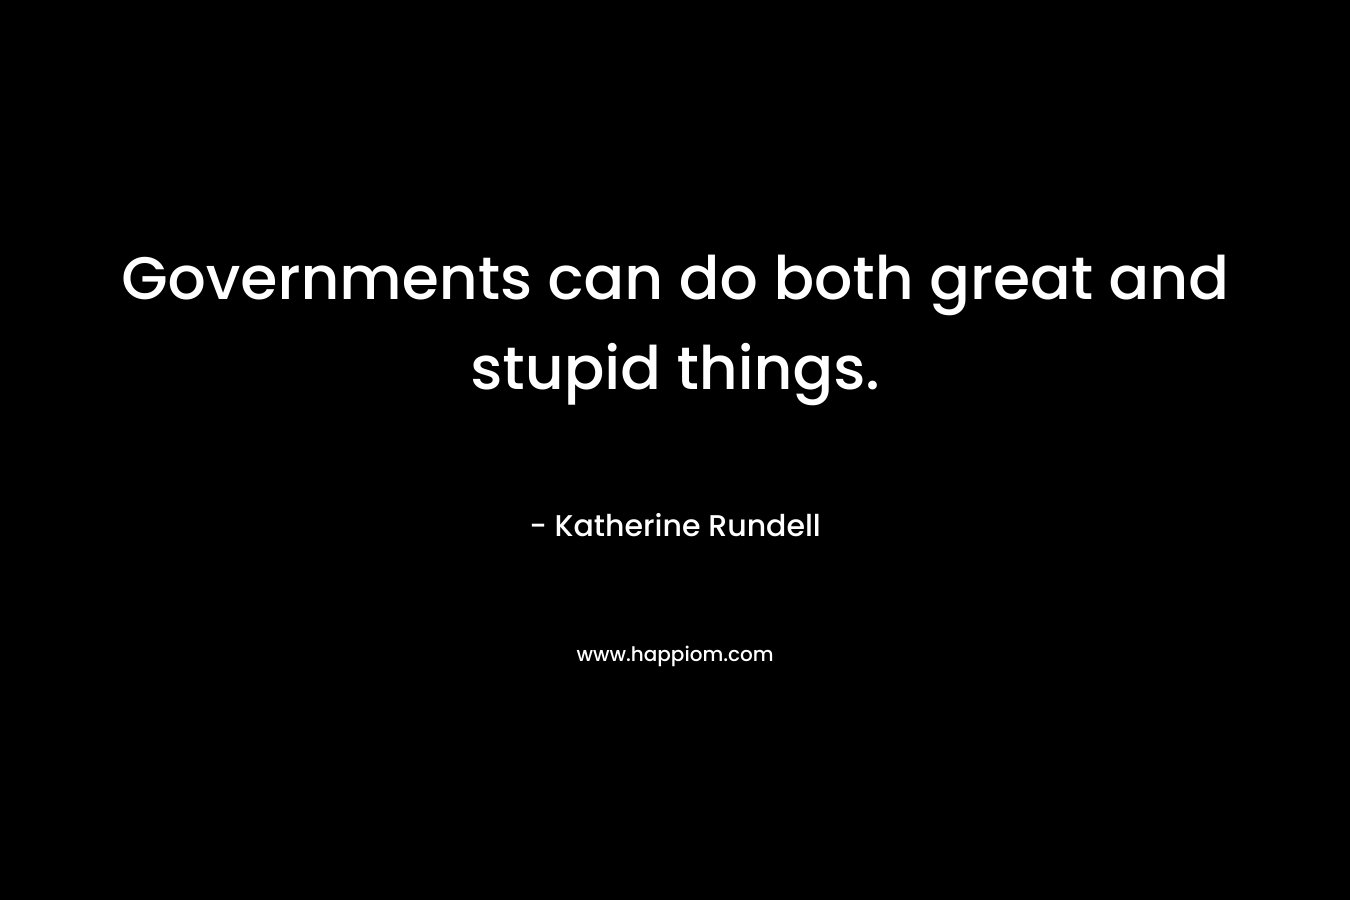 Governments can do both great and stupid things.